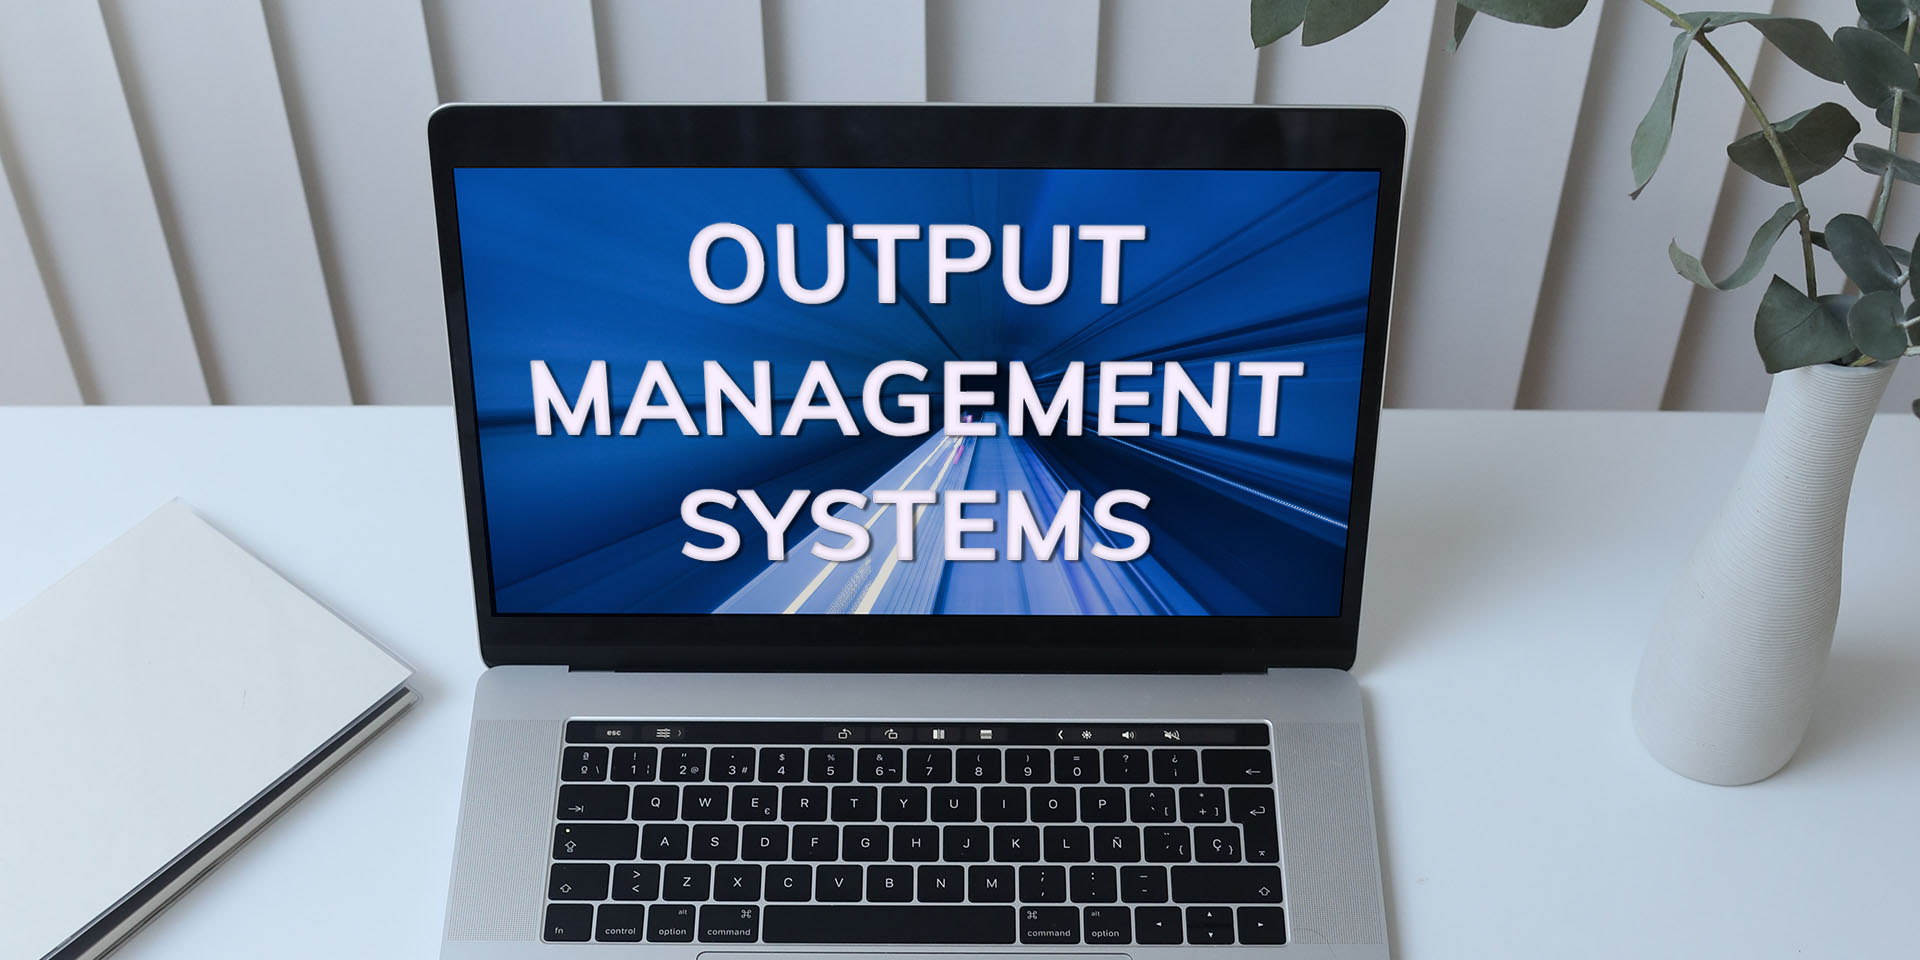 An Output Management system is software that improves the composition, delivery, storage, and retrieval of outbound communications from other business systems such as ERP or CRM